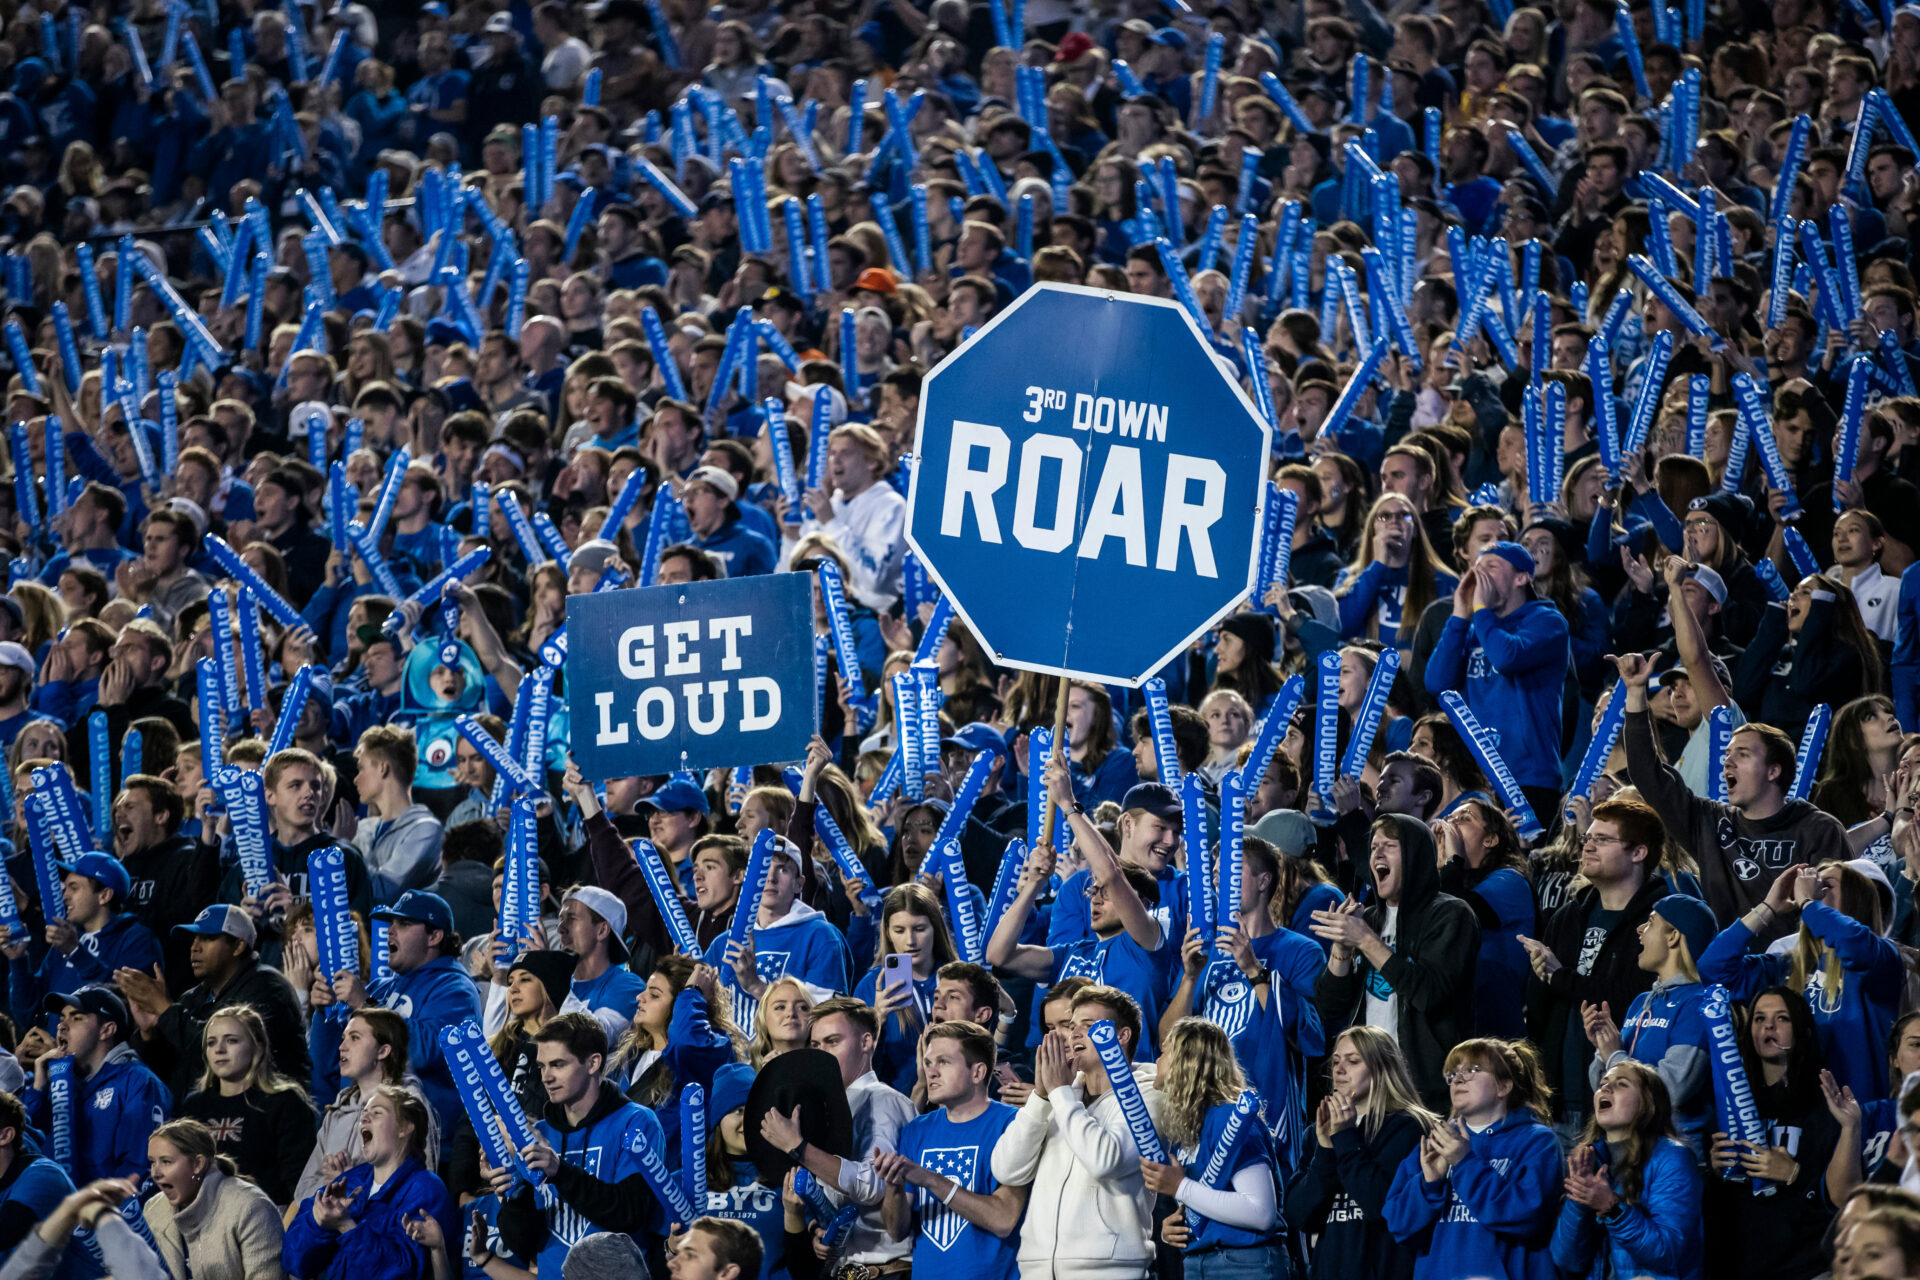 ROC leadership, students respond to BYU's "record day" for ROC pass